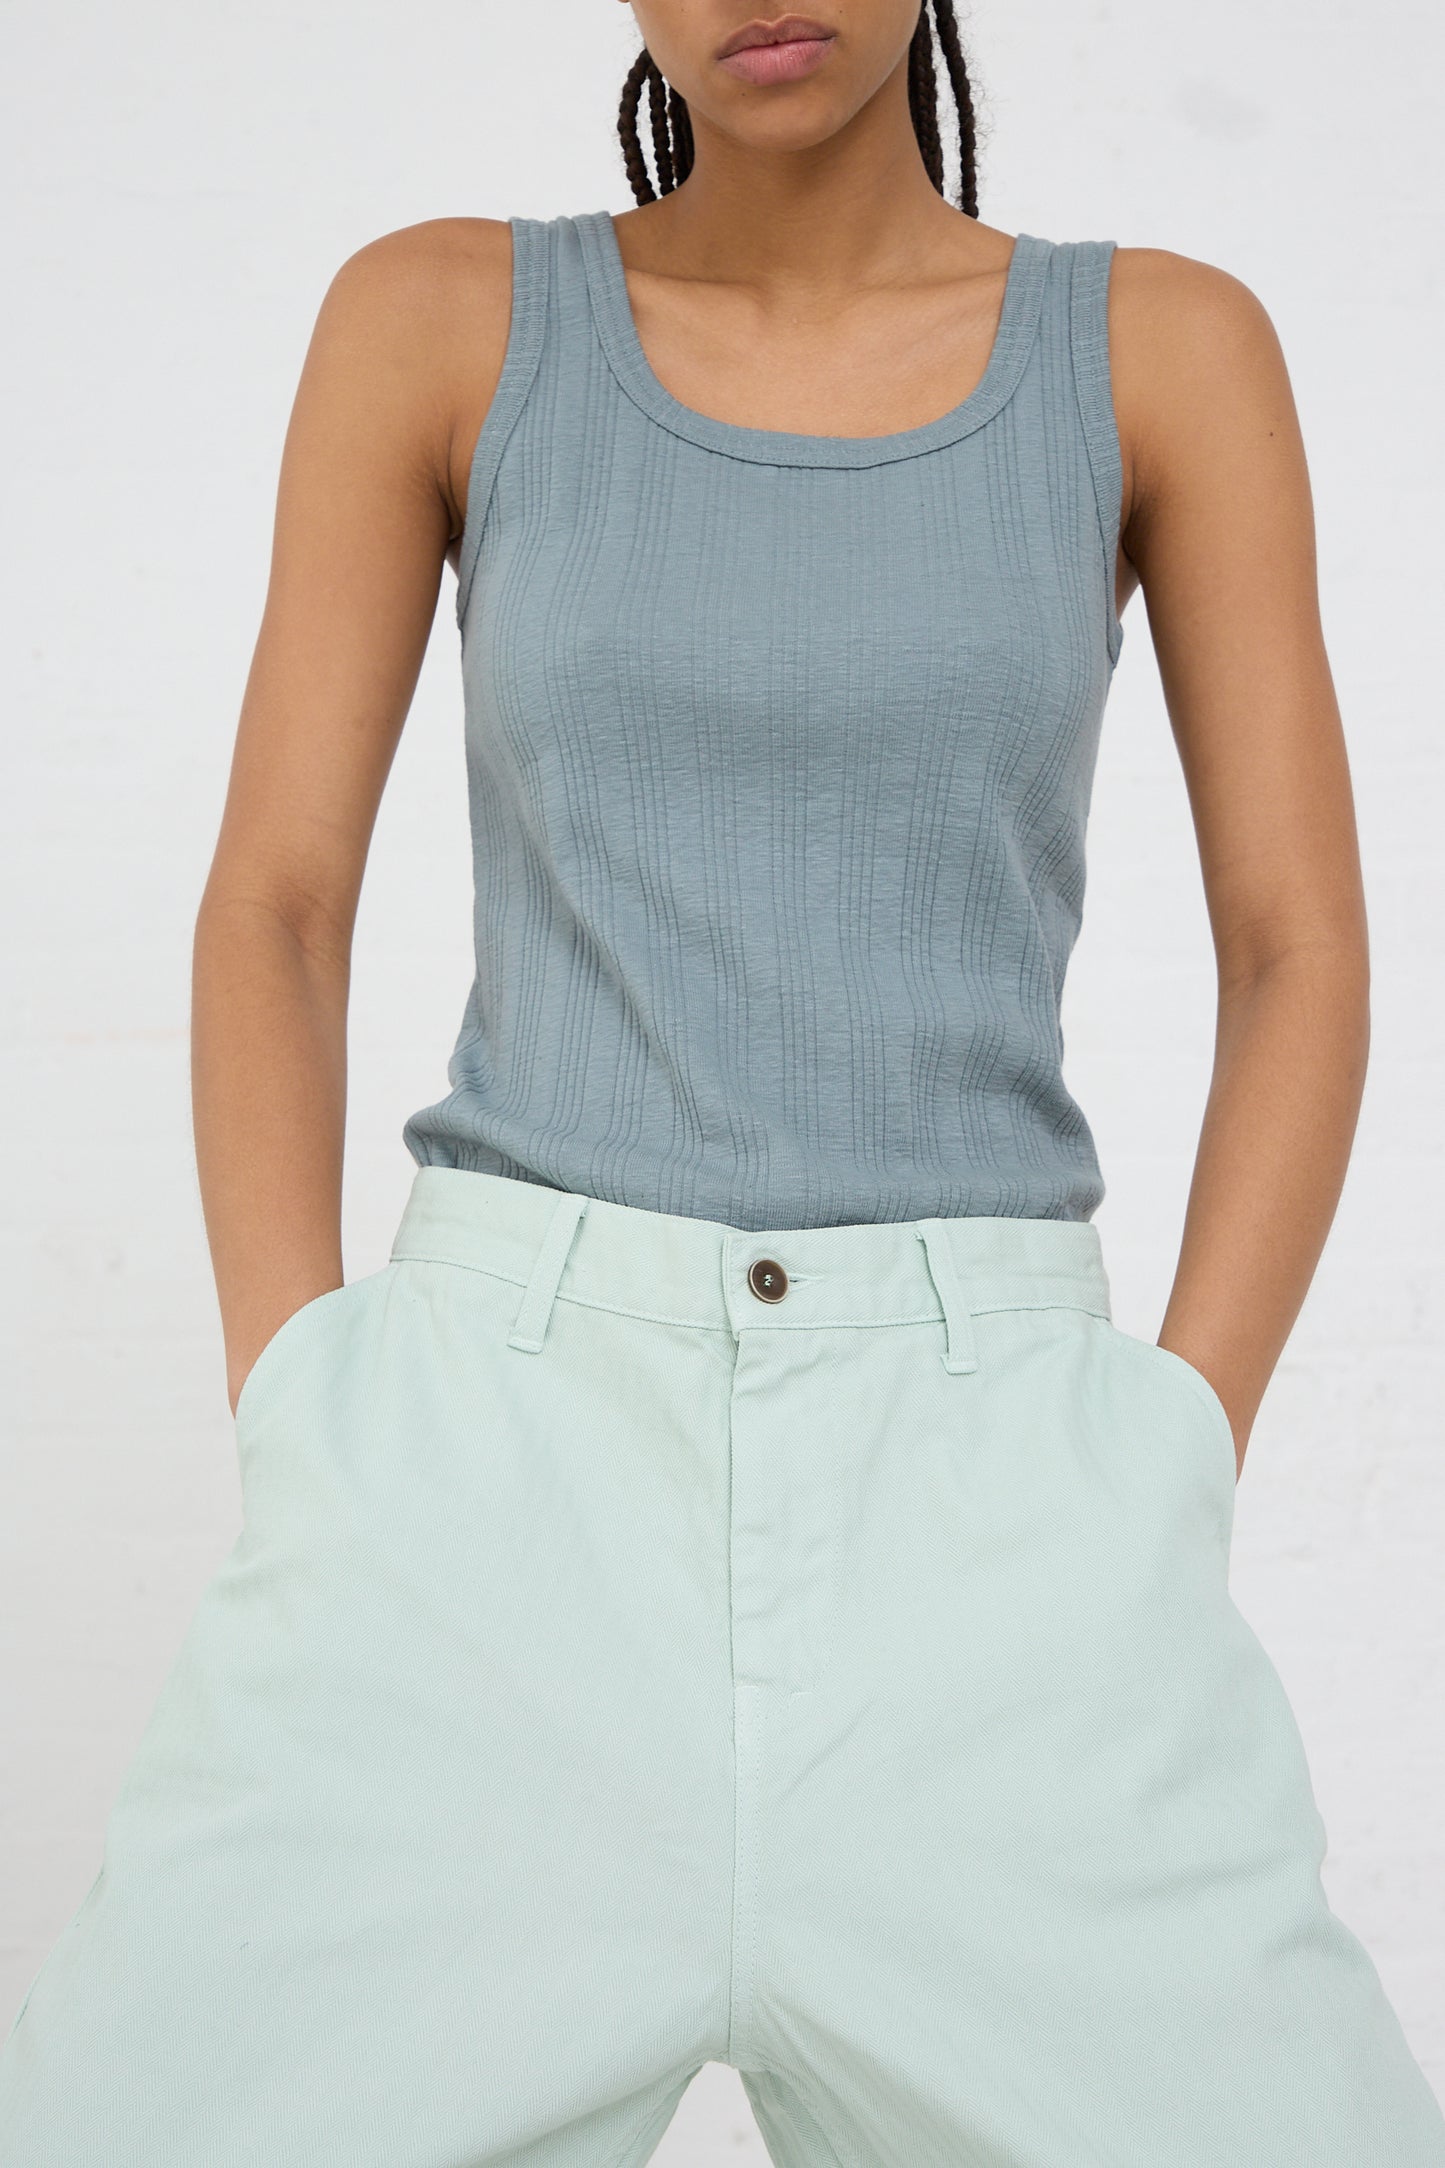 Woman wearing a grey tank top and Ichi Antiquités Herringbone Garment Dye Pant in Ice Green against a white background.